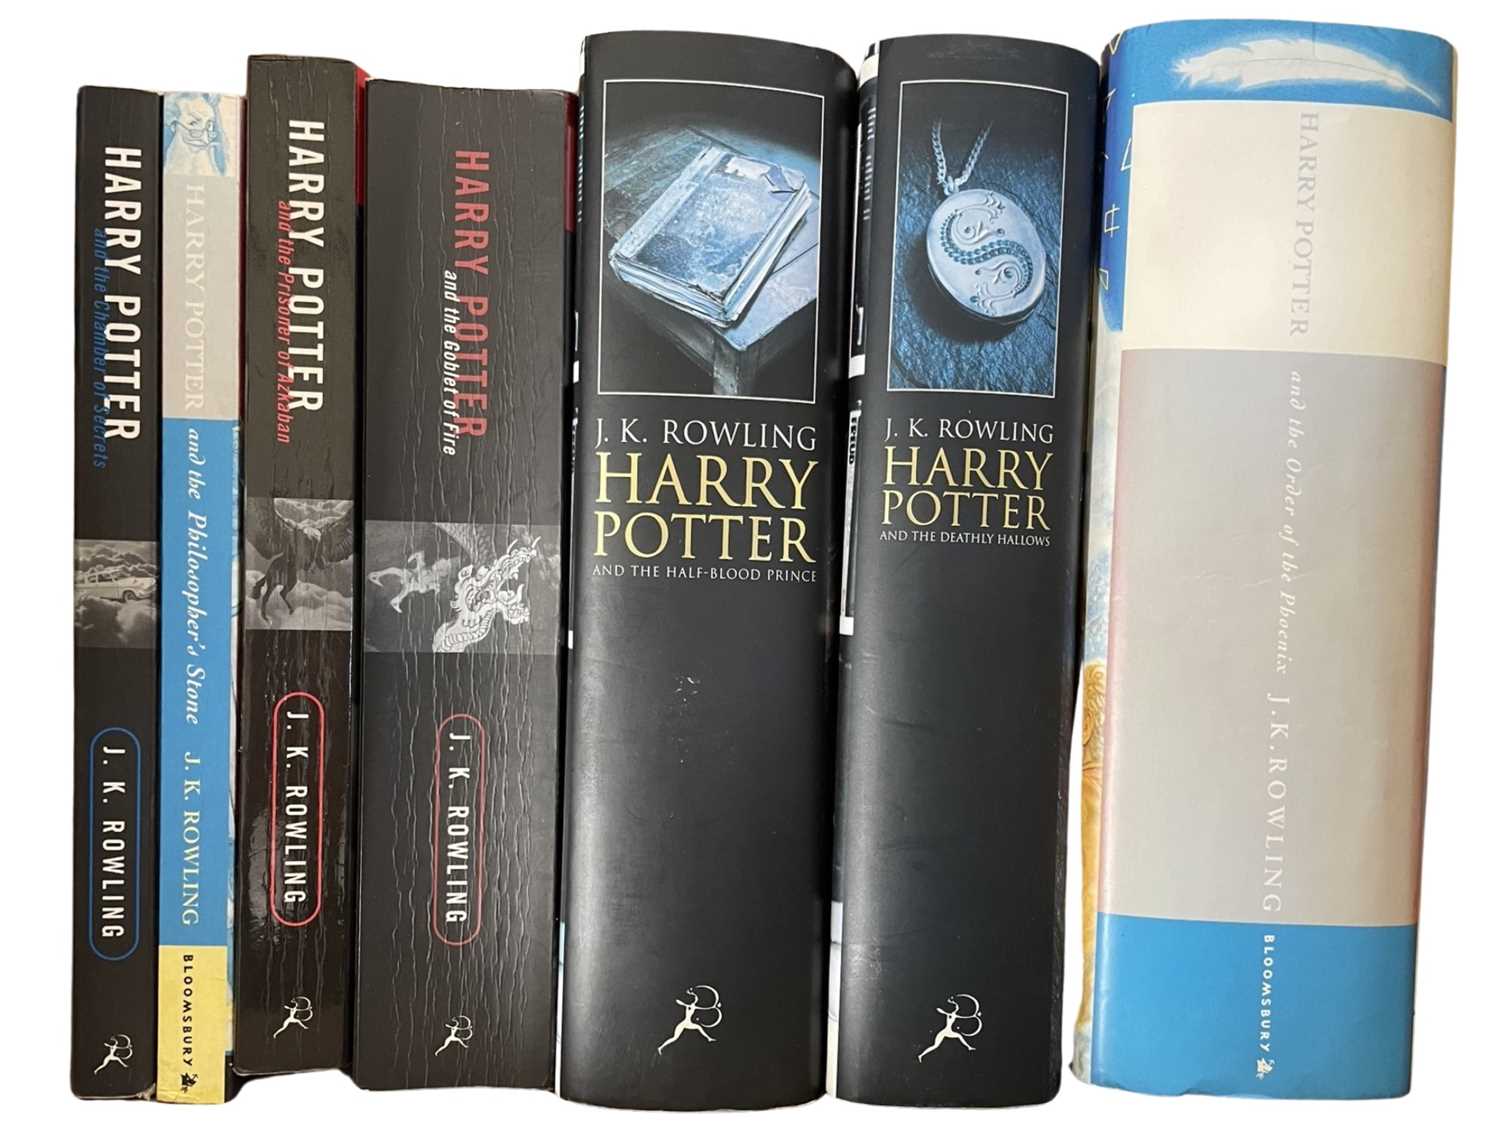 A collection of Harry Potter books, mixed editions and covers. - Image 2 of 2